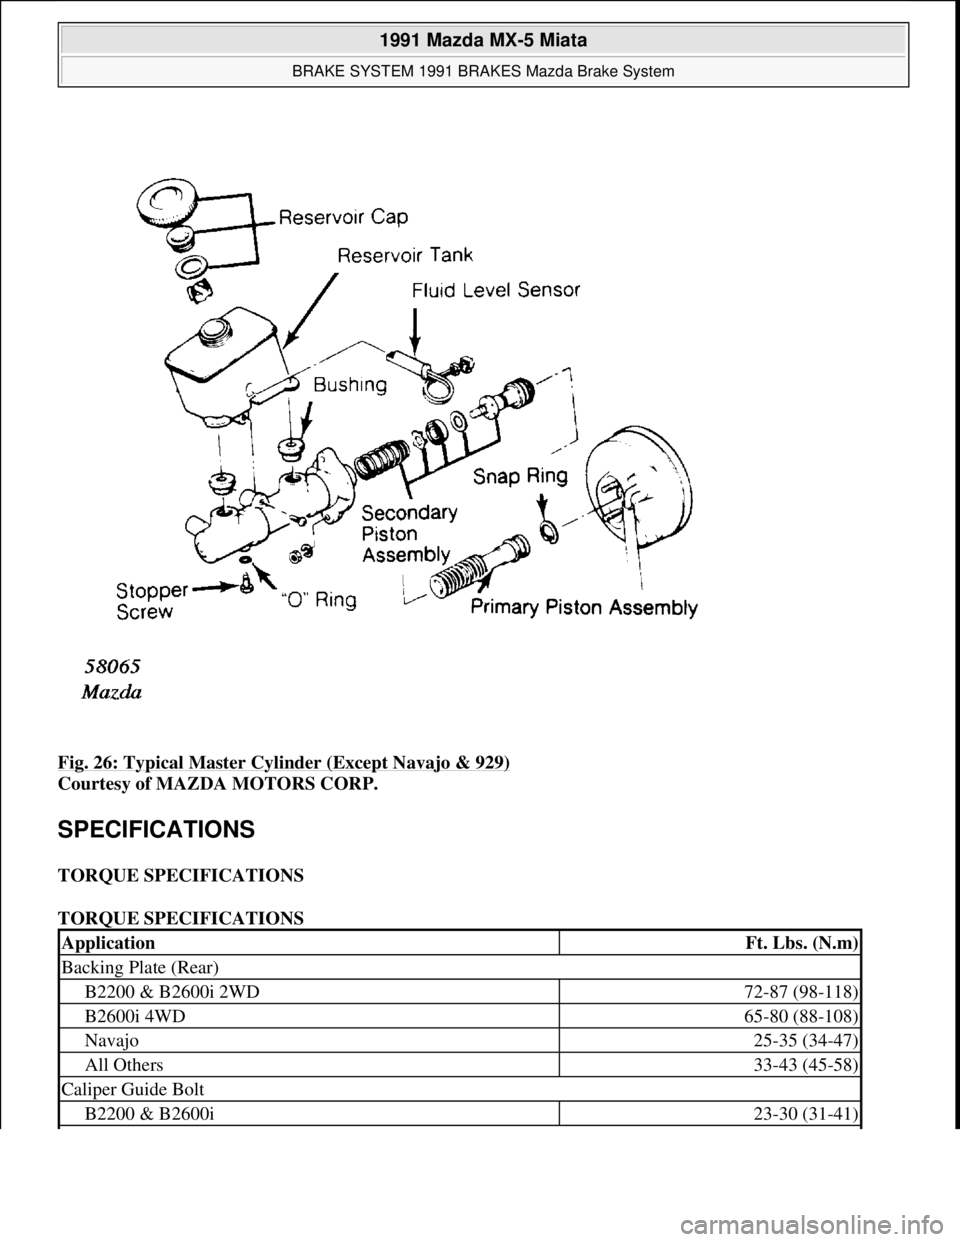 MAZDA MIATA 1991  Factory Service Manual Fig. 26: Typical Master Cylinder (Except Navajo & 929) 
Courtesy of MAZDA MOTORS CORP. 
SPECIFICATIONS 
TORQUE SPECIFICATIONS 
TORQUE SPECIFICATIONS 
ApplicationFt. Lbs. (N.m)
Backing Plate (Rear)
B22